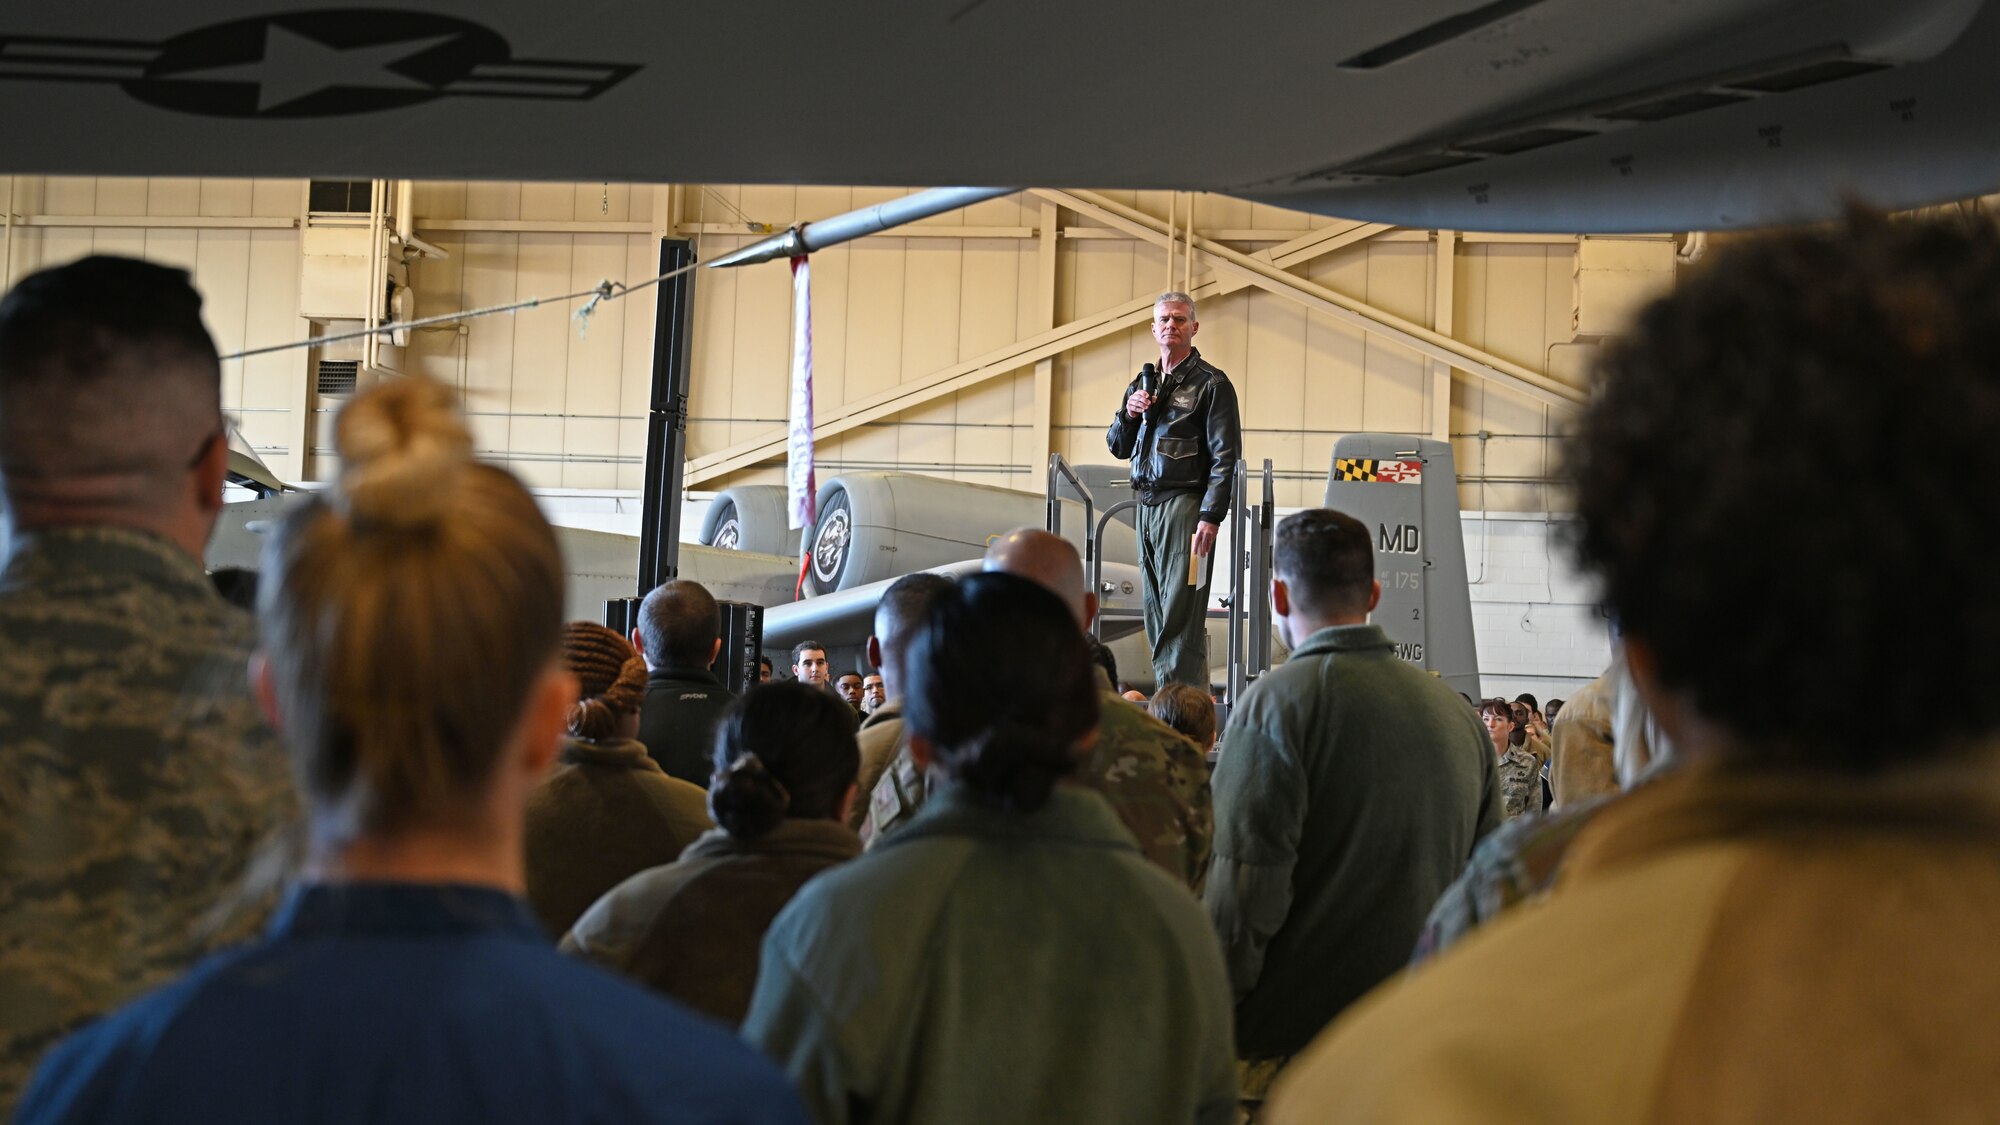 U.S. Air Force Brig. Gen. Paul Johnson, 175th Wing commander, holds a wing-level all call to kick of the Resilience Tactical Pause, Nov. 3 at Warfield Air National Guard Base, Middle River, Md. The Resilence Tactical Pause was mandated by Air Force Chief of Staff General David L. Goldfein to provide an opportunity for leaders to engage their Airmen in a manner that fosters interpersonal connection. (Air National Guard photo by Master Sgt. Chris Schepers)